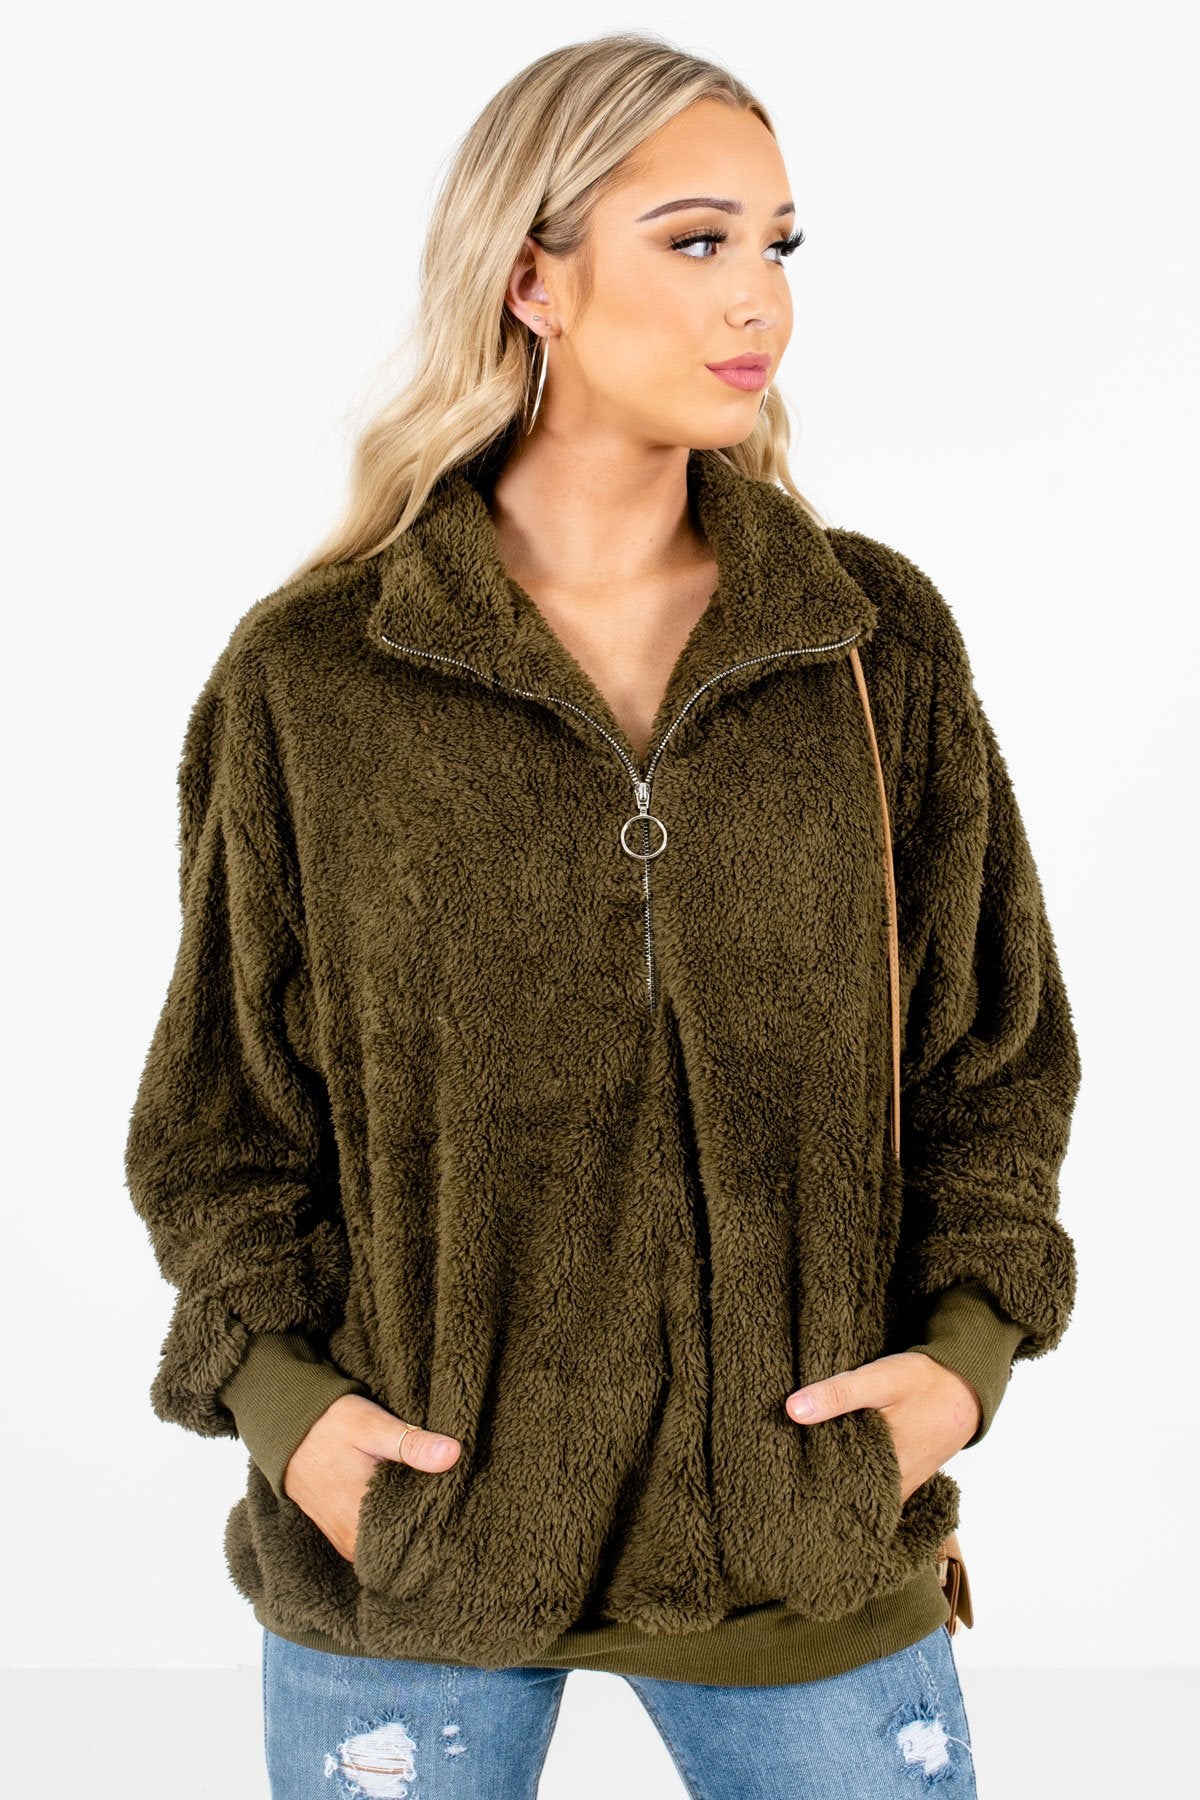 Women’s Olive Green Long Sleeve Boutique Pullover